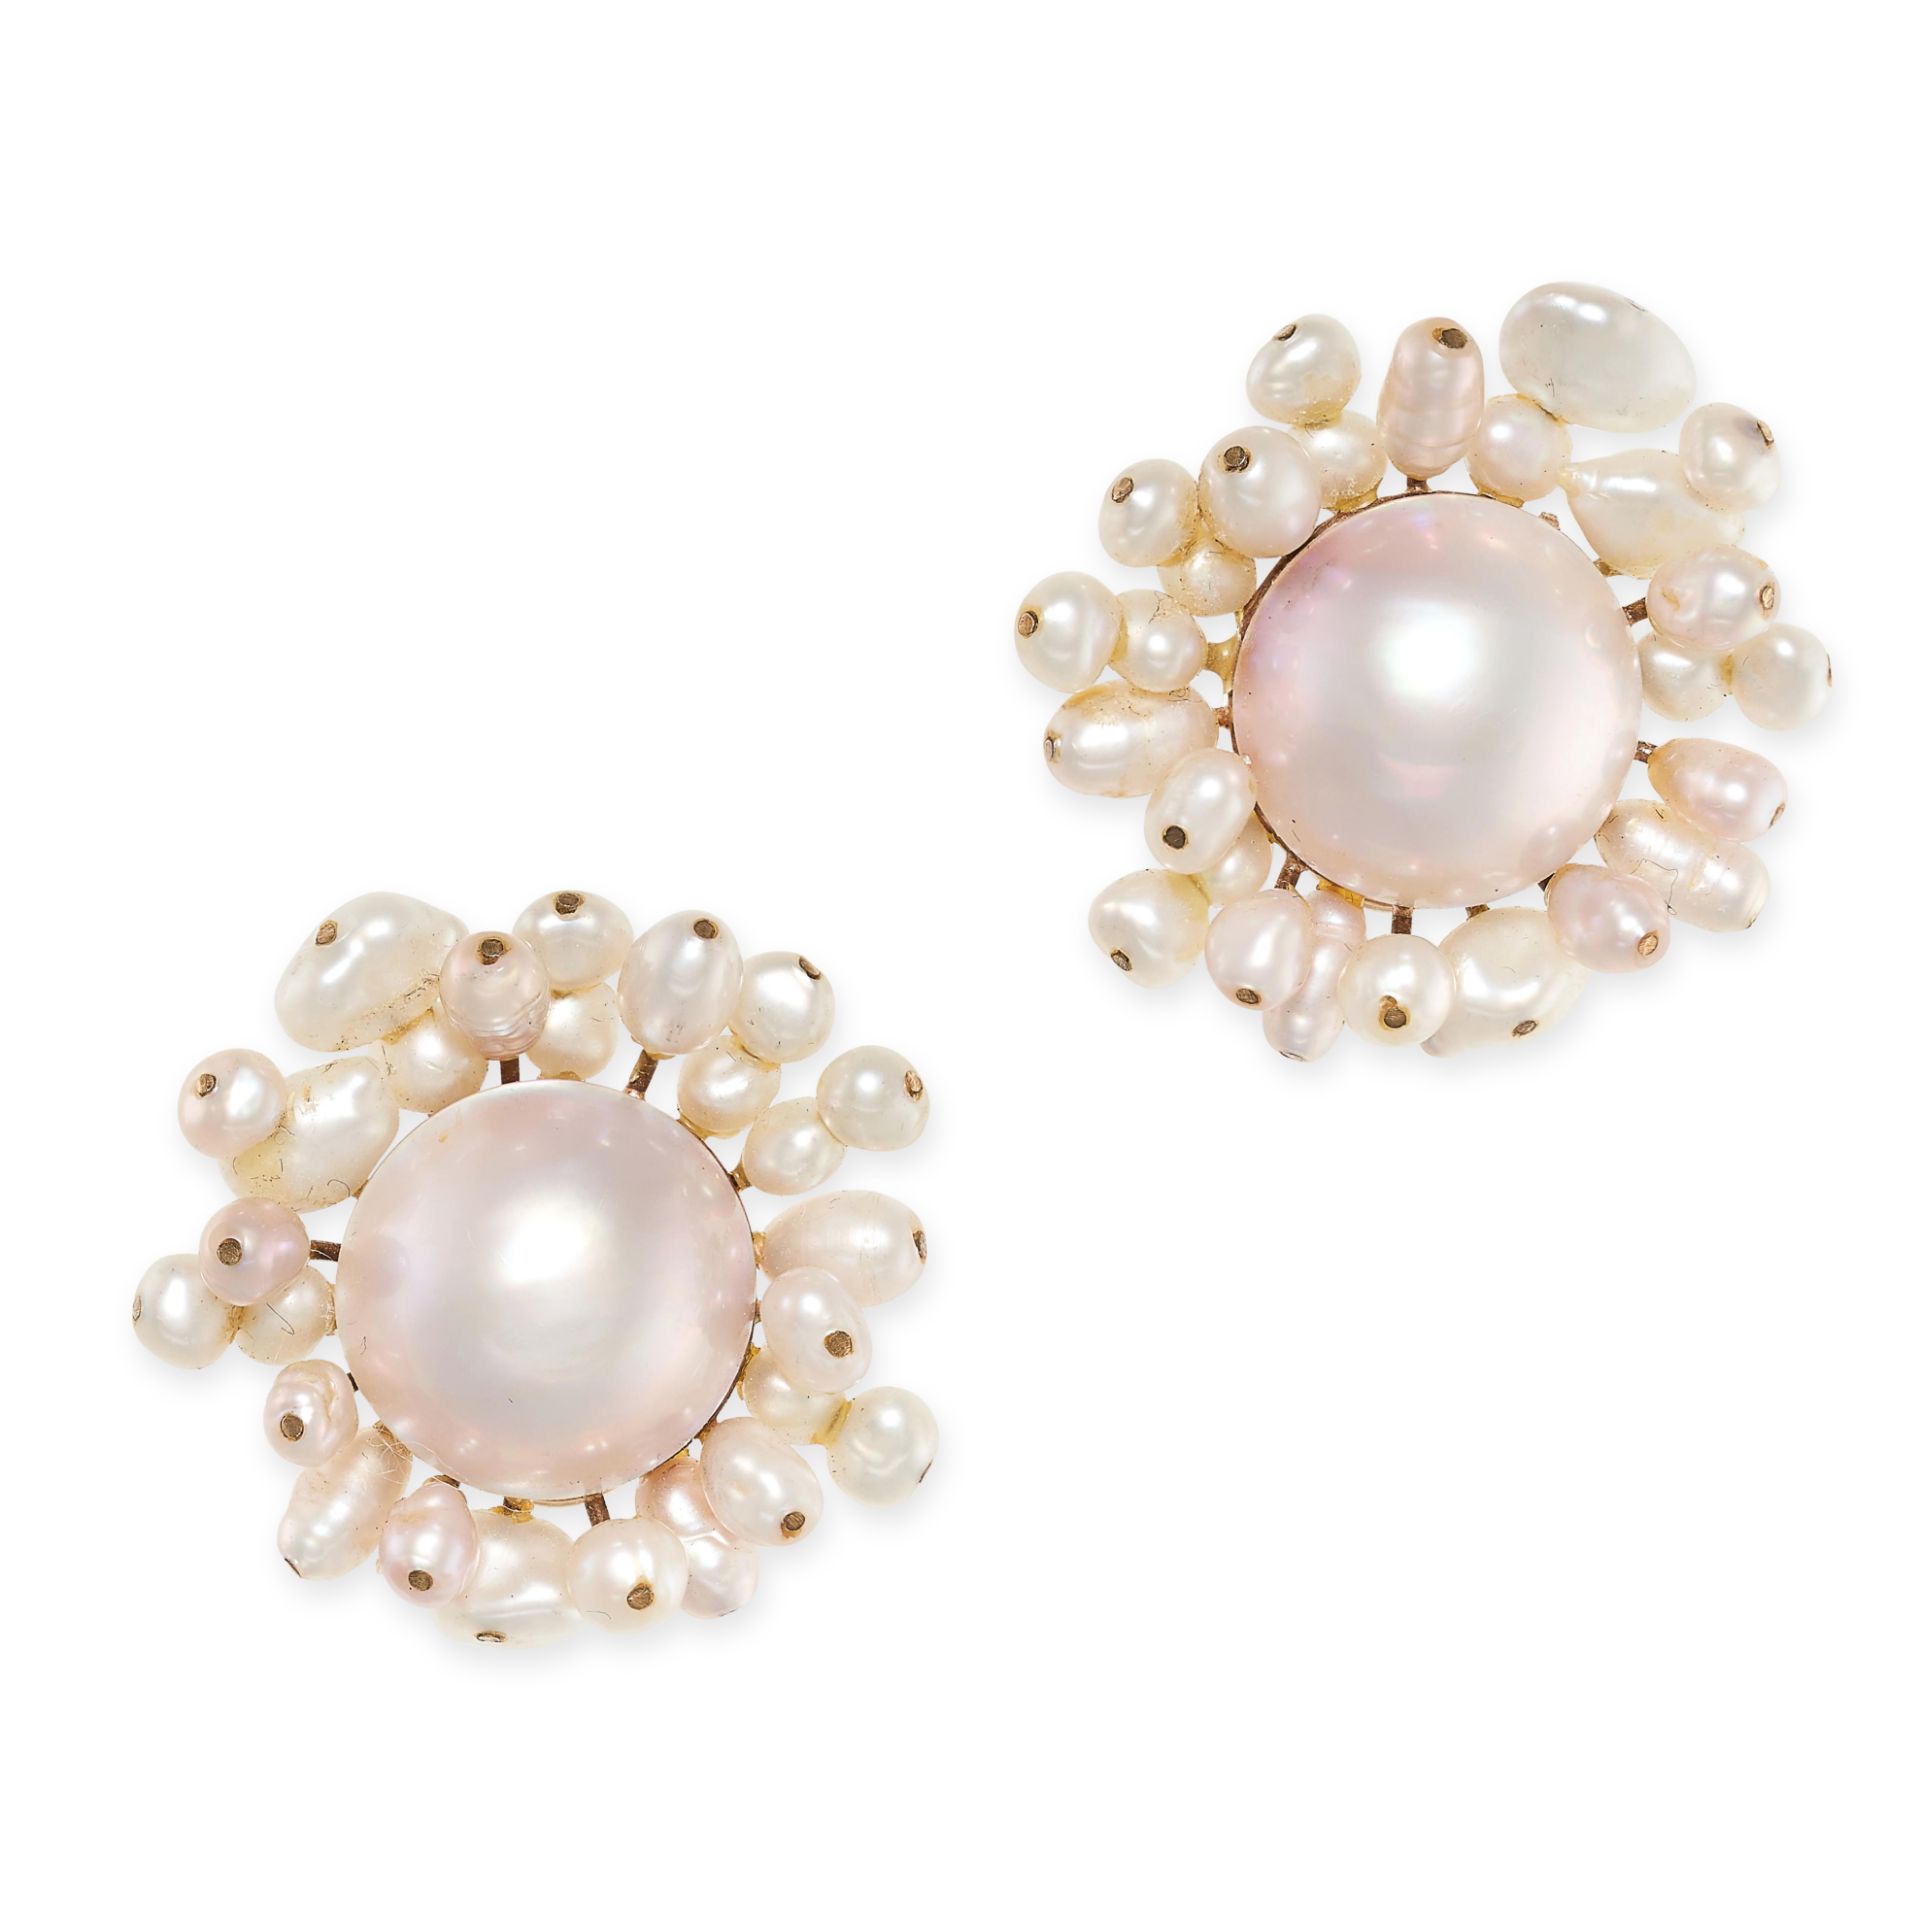 TWO PAIRS OF PEARL CLIP EARRINGS one set with a central mabe pearl in a cluster of baroque pearls,